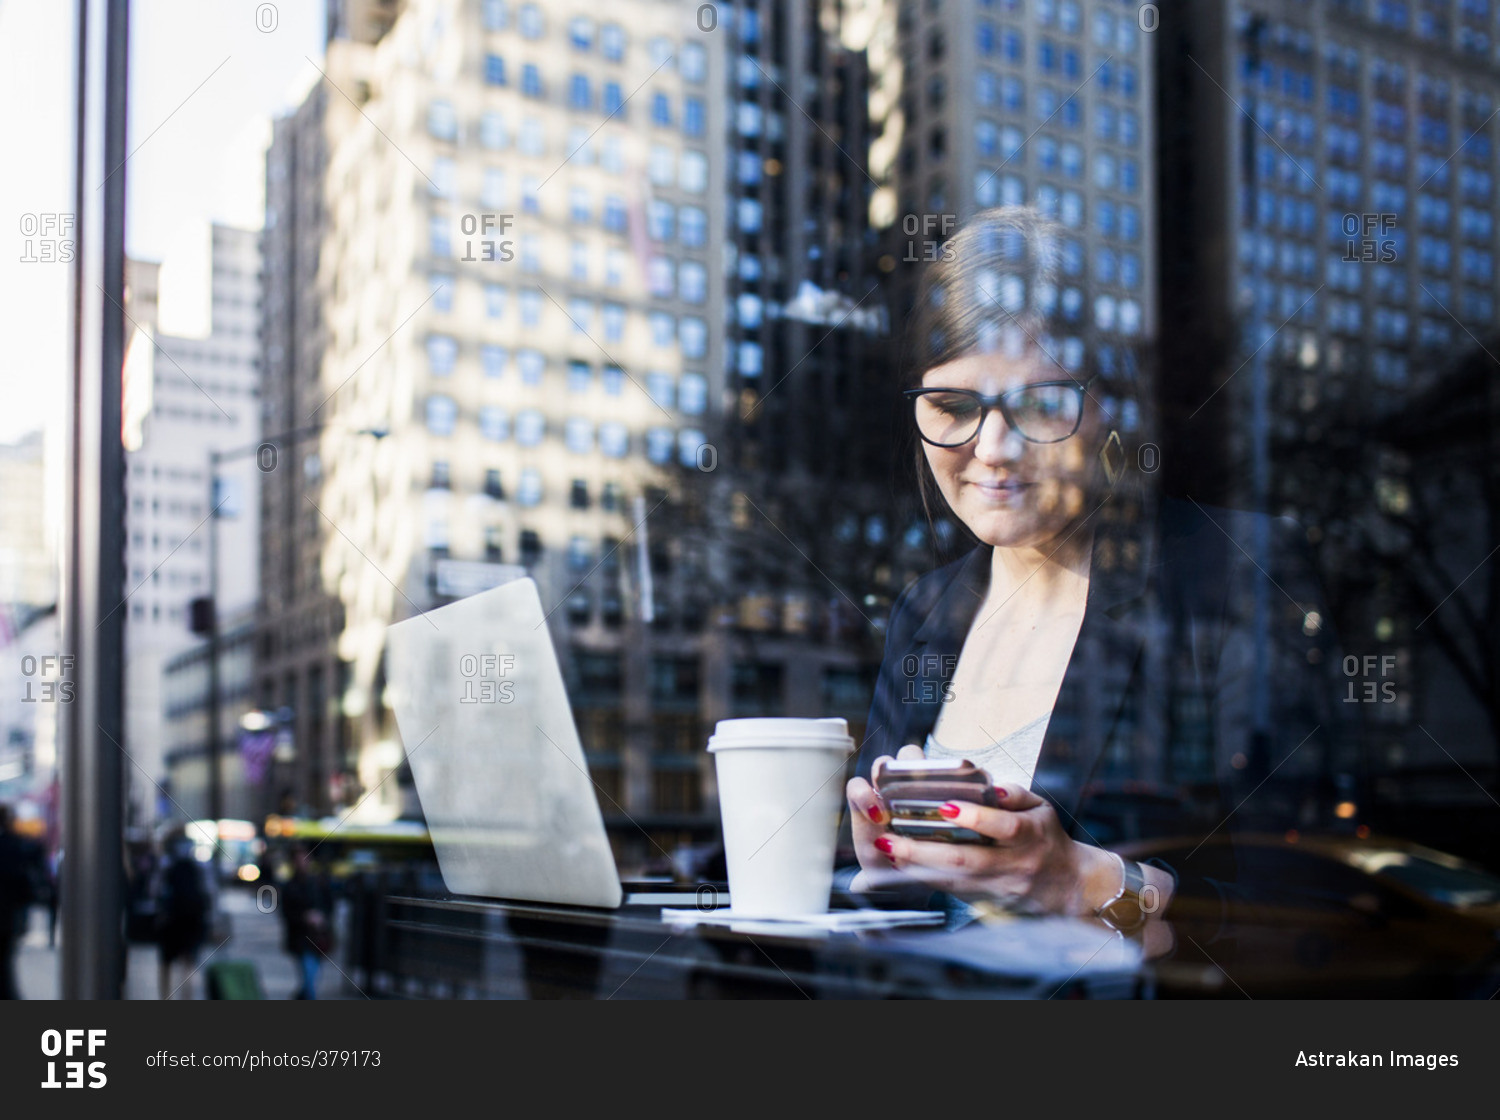 Businesswoman with technologies at cafe seen through window reflecting buildings